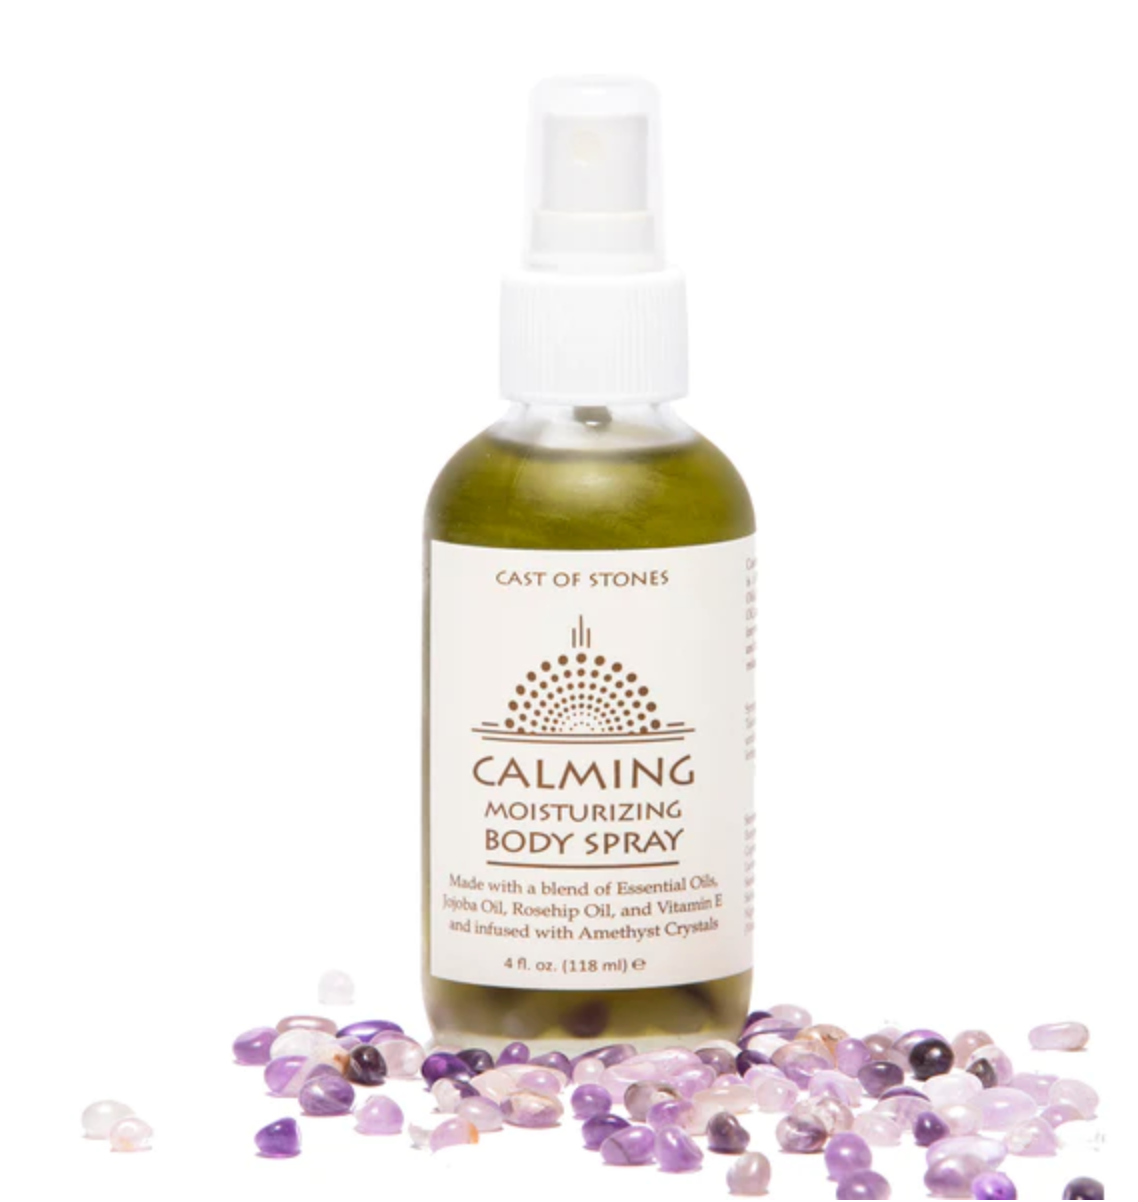 Calming Moisturizing Spray Infused with Amethyst Crystals